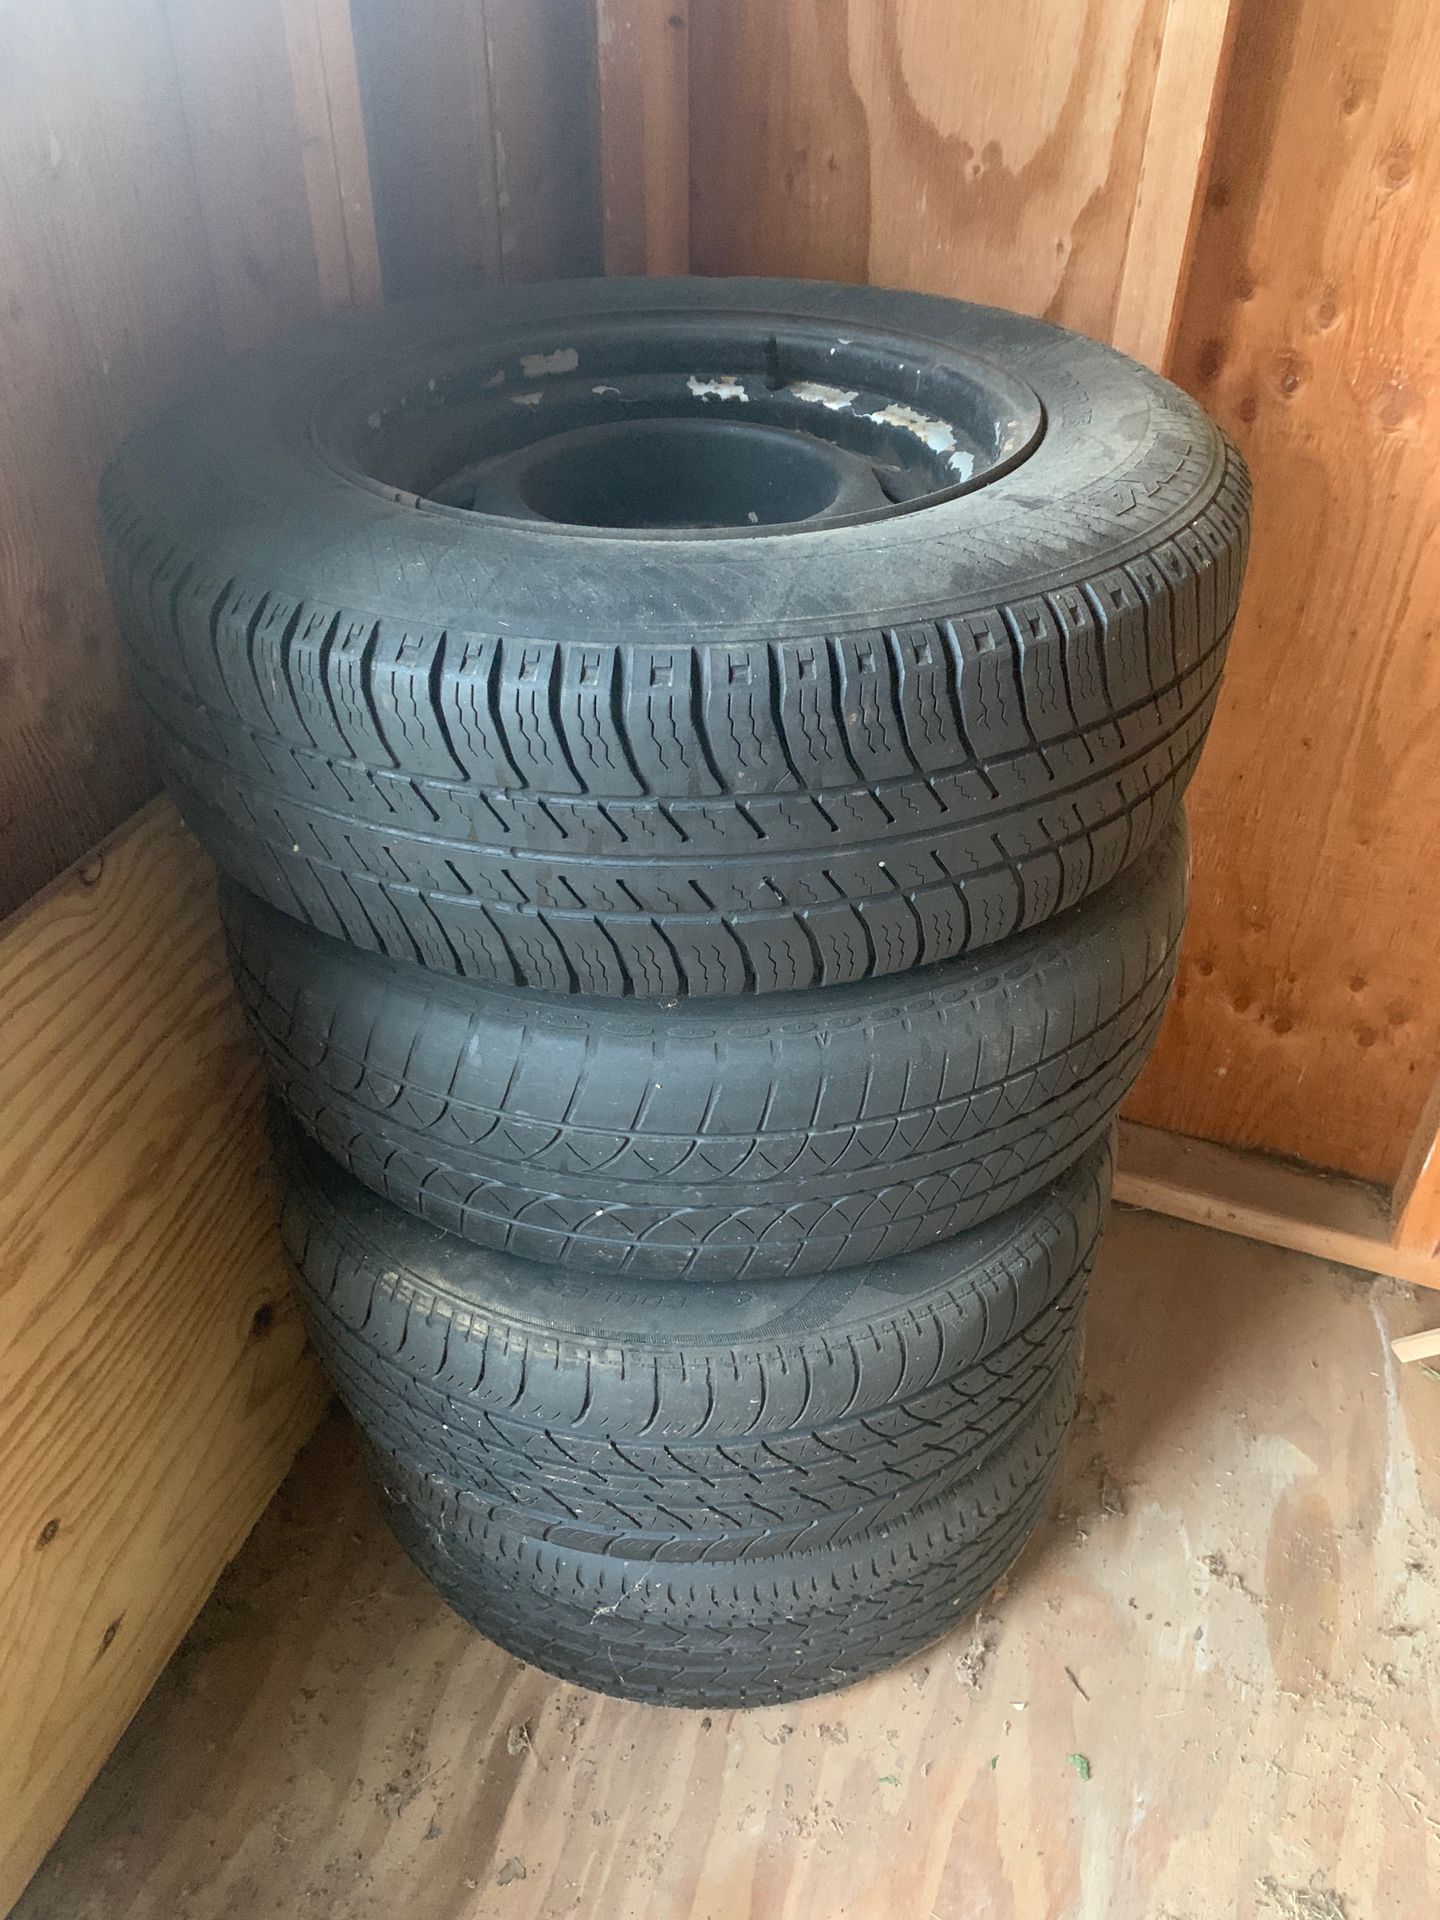 (4) - 15” Rims & Tires , no rust, dents. Holds Air.